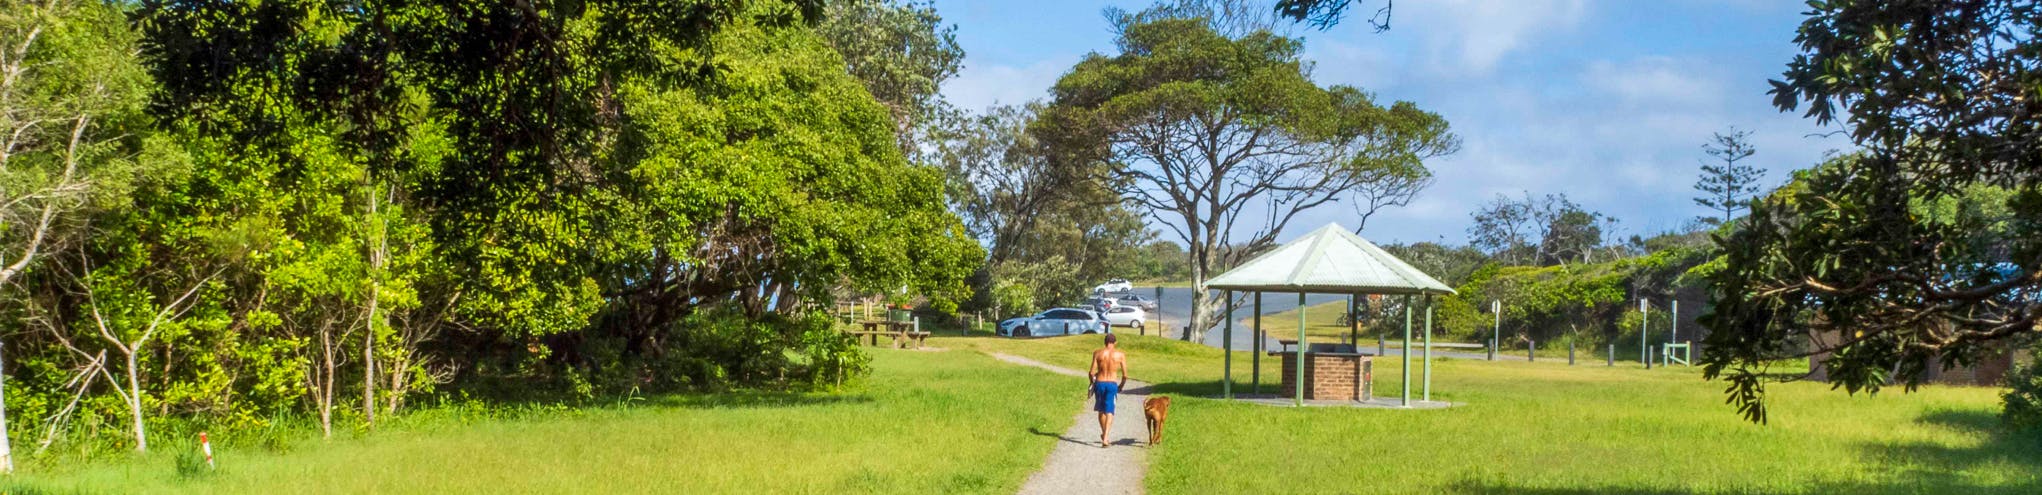 Mullaway Beach Reserve forms part of the Coffs Coast Regional Park. Concepts have been prepared for works in 2021 and future enhancements for the Reserve.